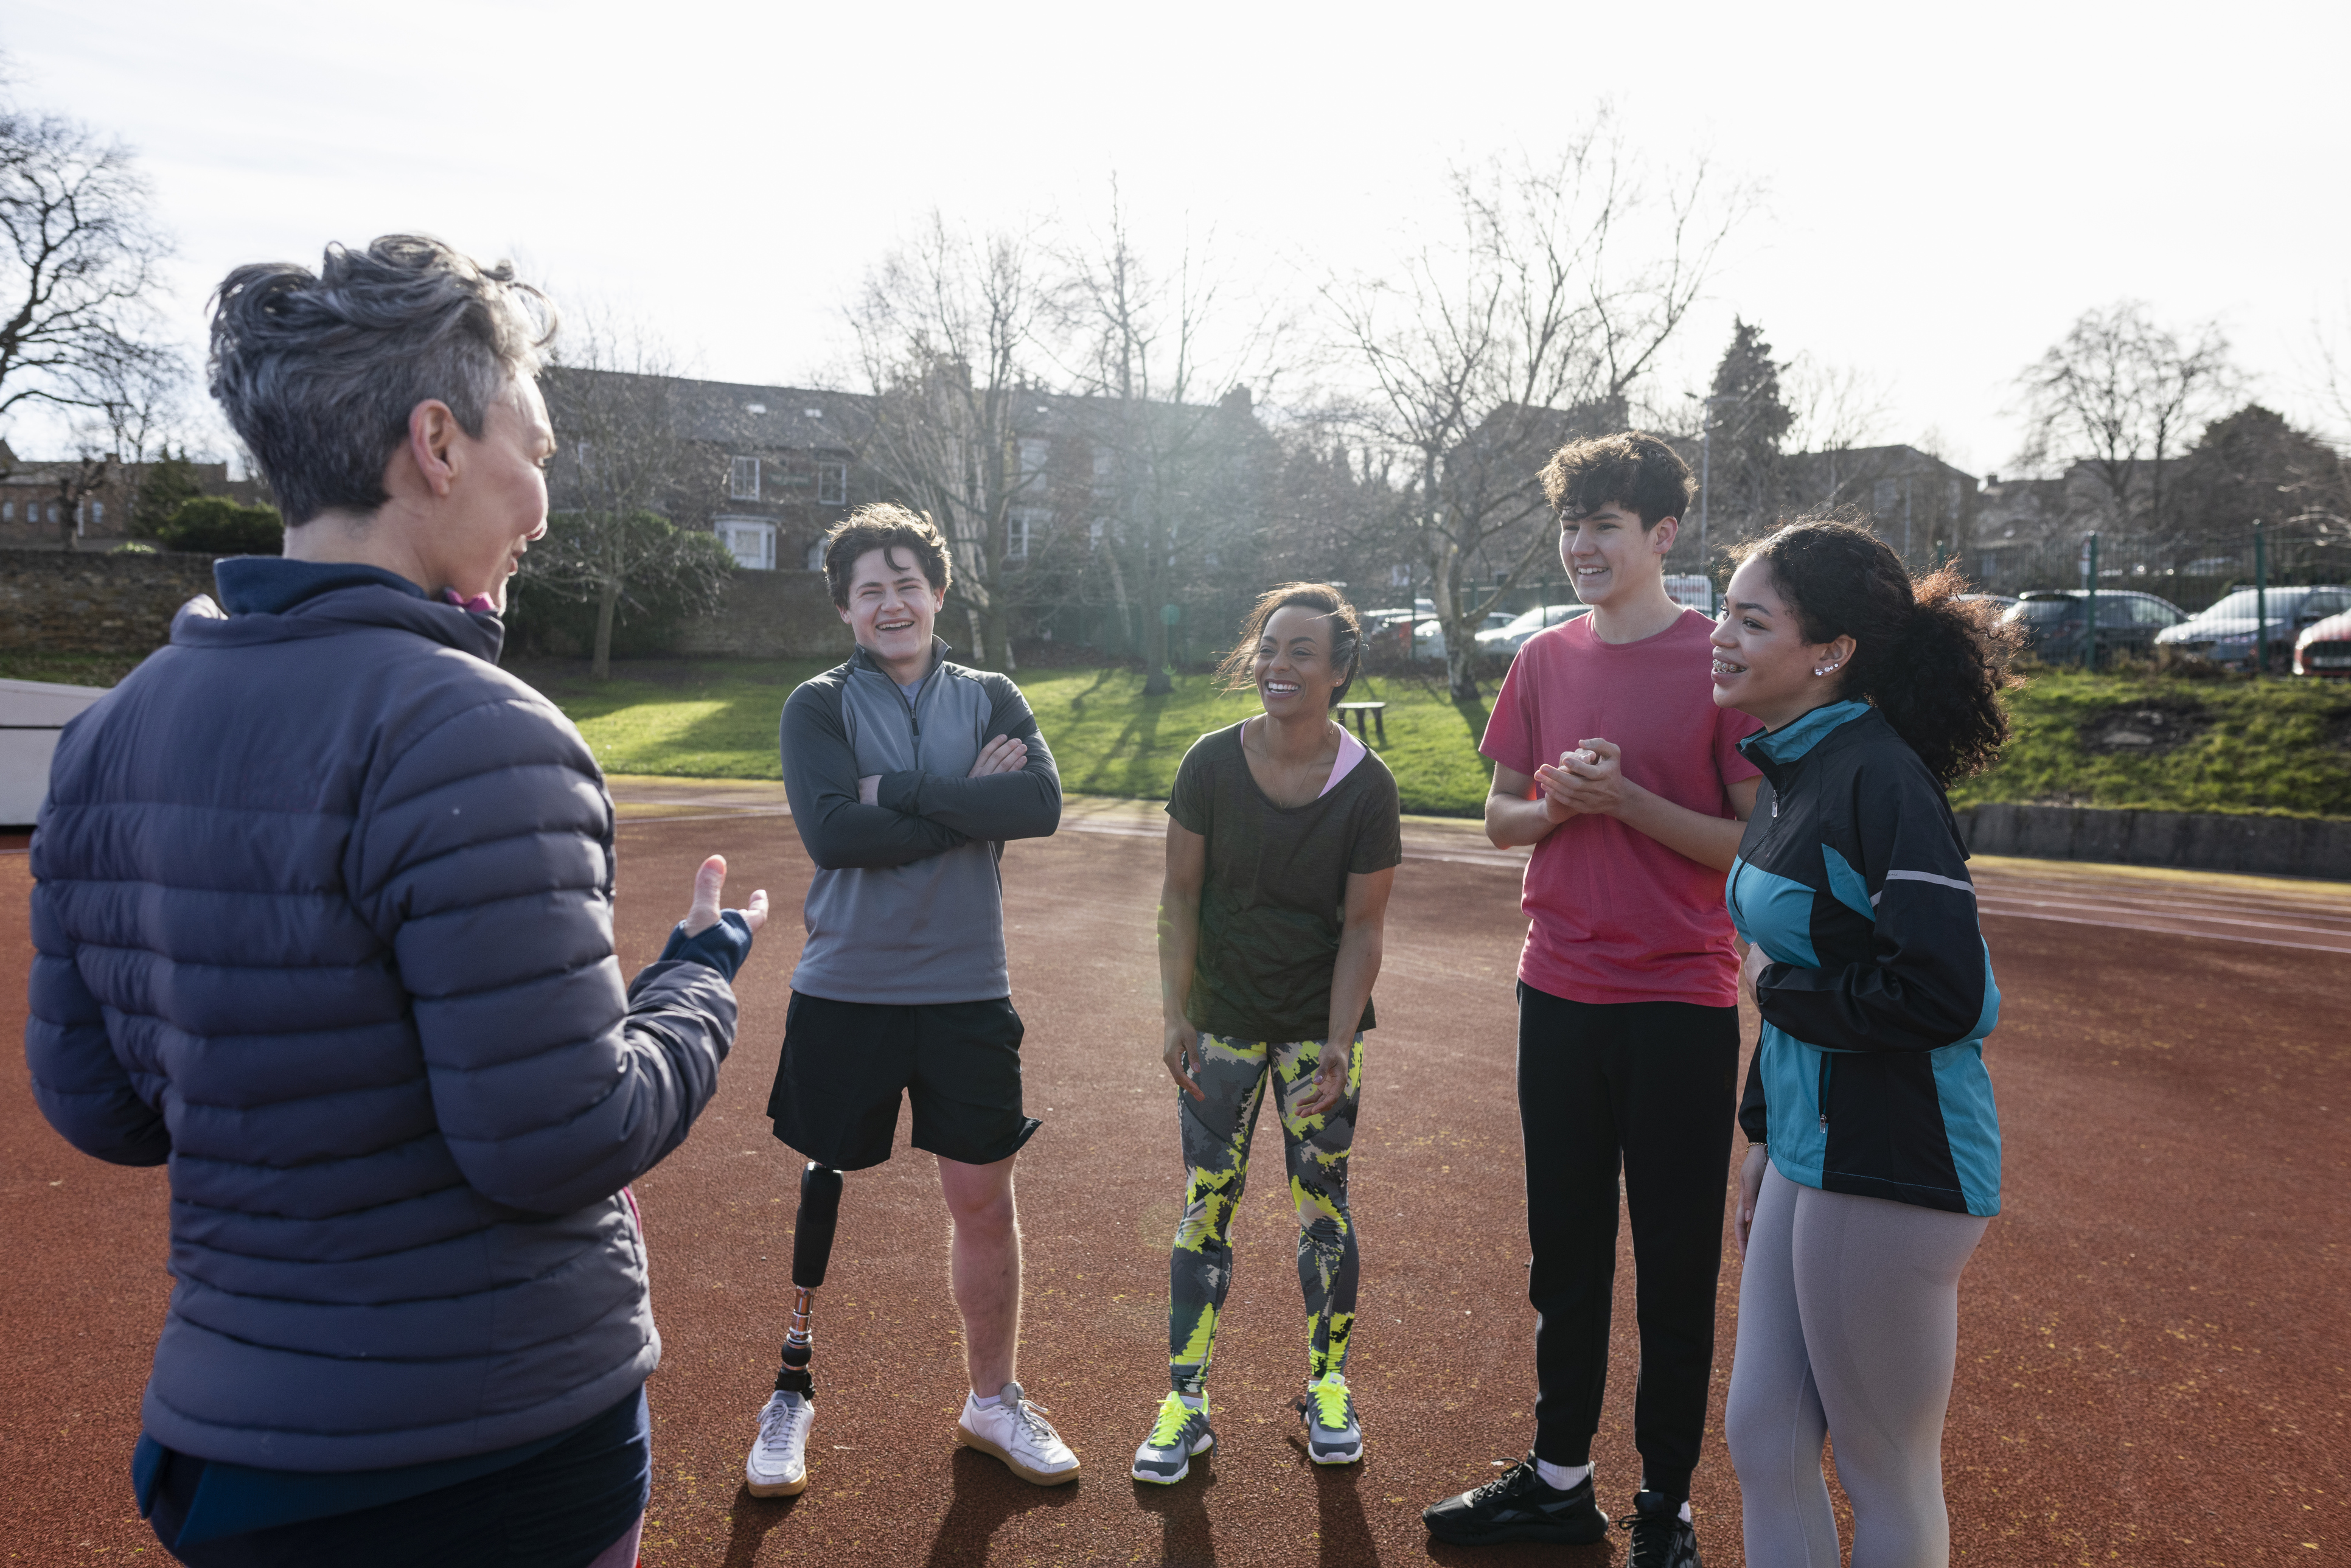 Four students stand facing their teacher on an outdoor track in late Fall. The teacher, who has short grey hair and wears a grey puffer jacket, has their back turned and is gesturing with their hands. All of the students wear athletic clothes, and they display a range of skin tones, gender expressions, and hair textures. One of the students is an amputee and has a prosthetic leg.